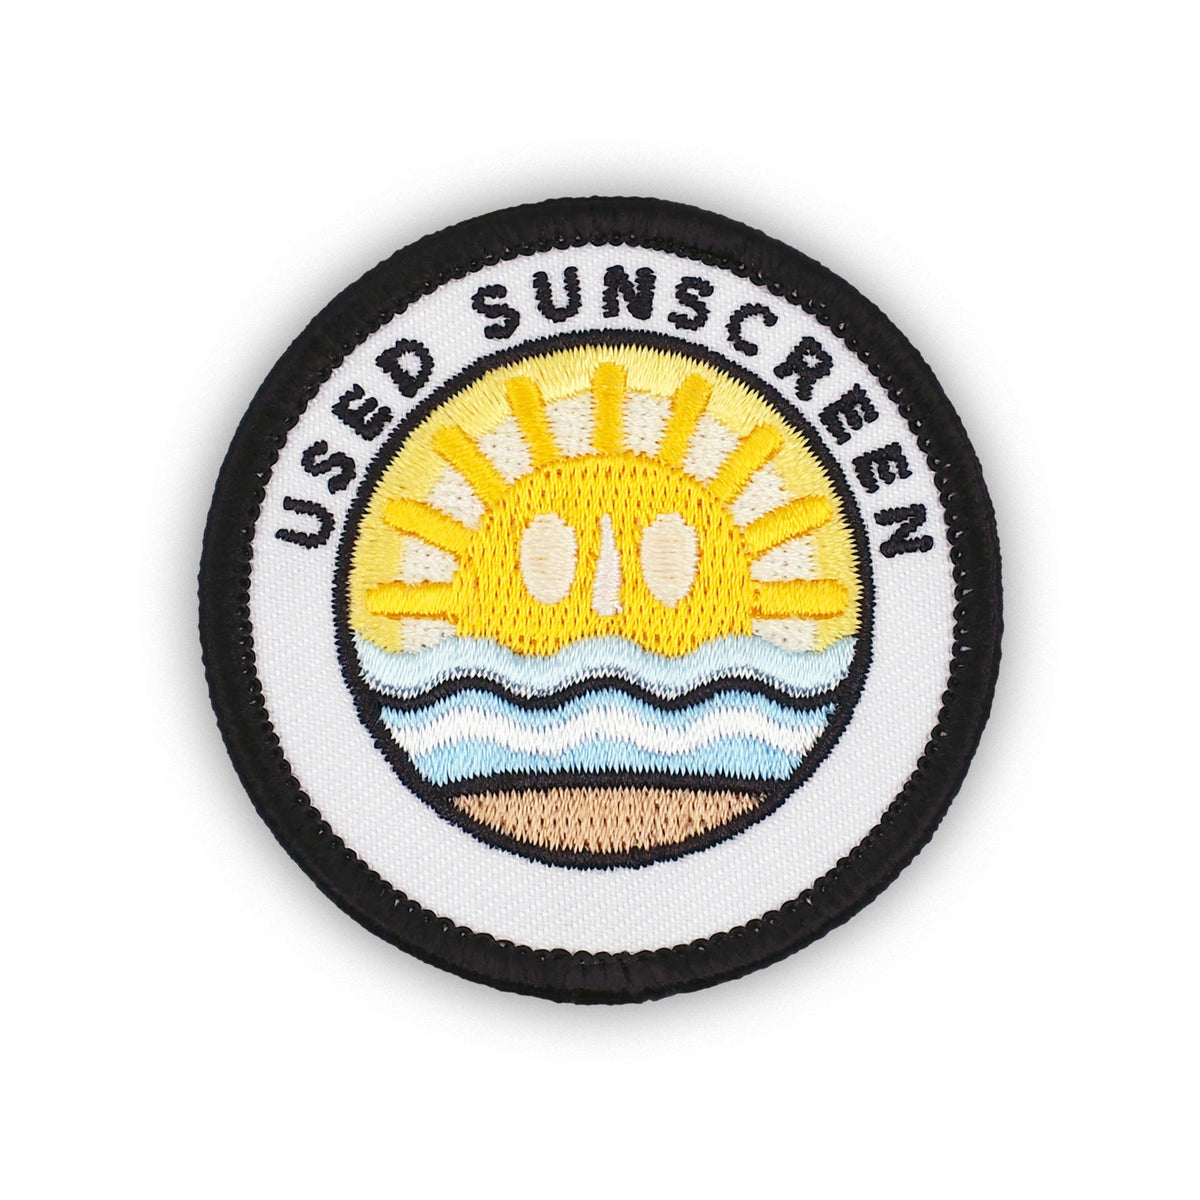 Used Sunscreen individual adulting merit badge patch for adults